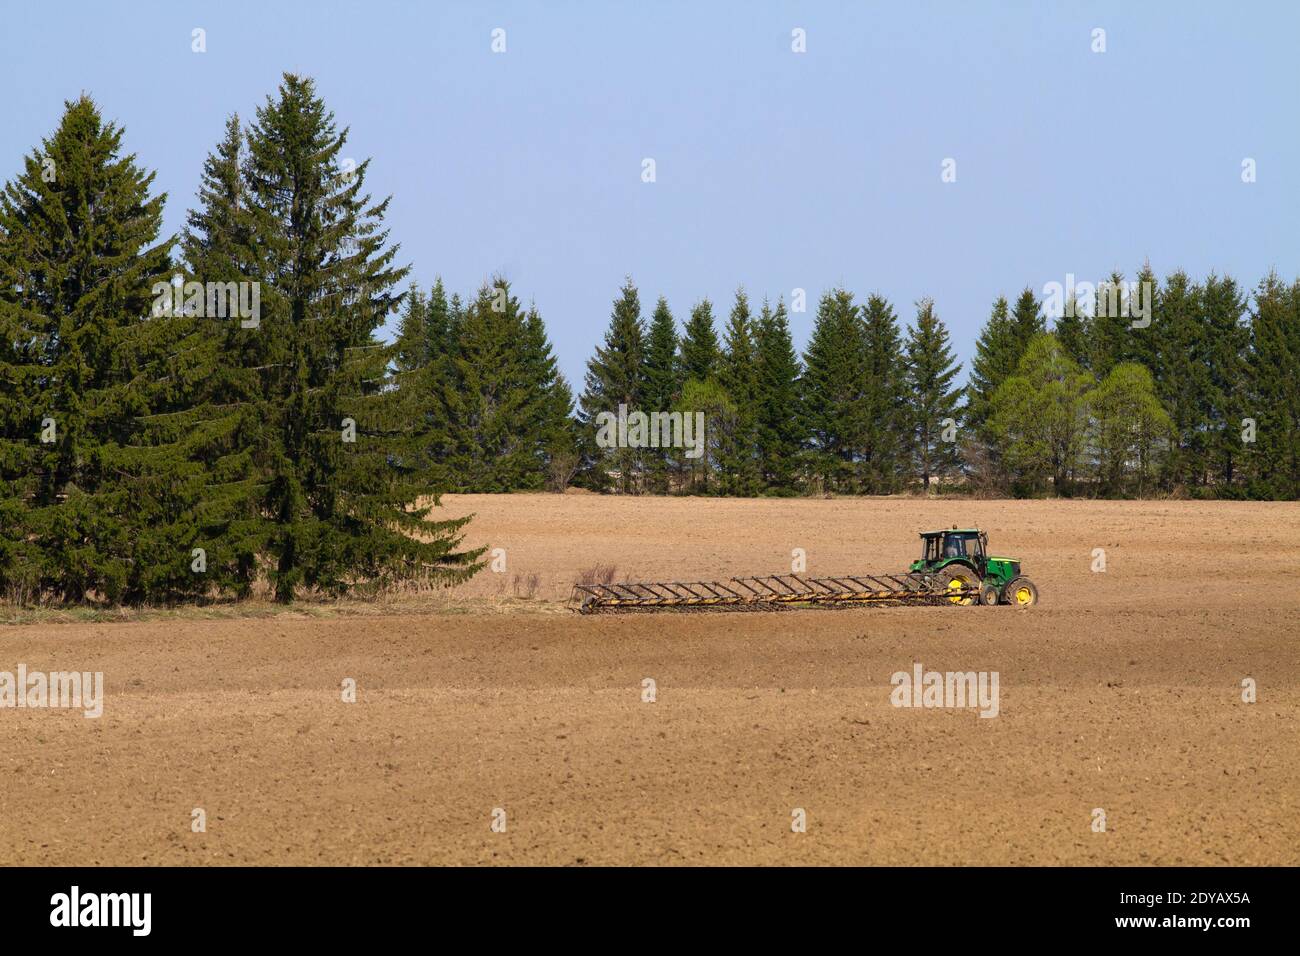 tractor with harrow working on the ploughed field in the spring Stock Photo